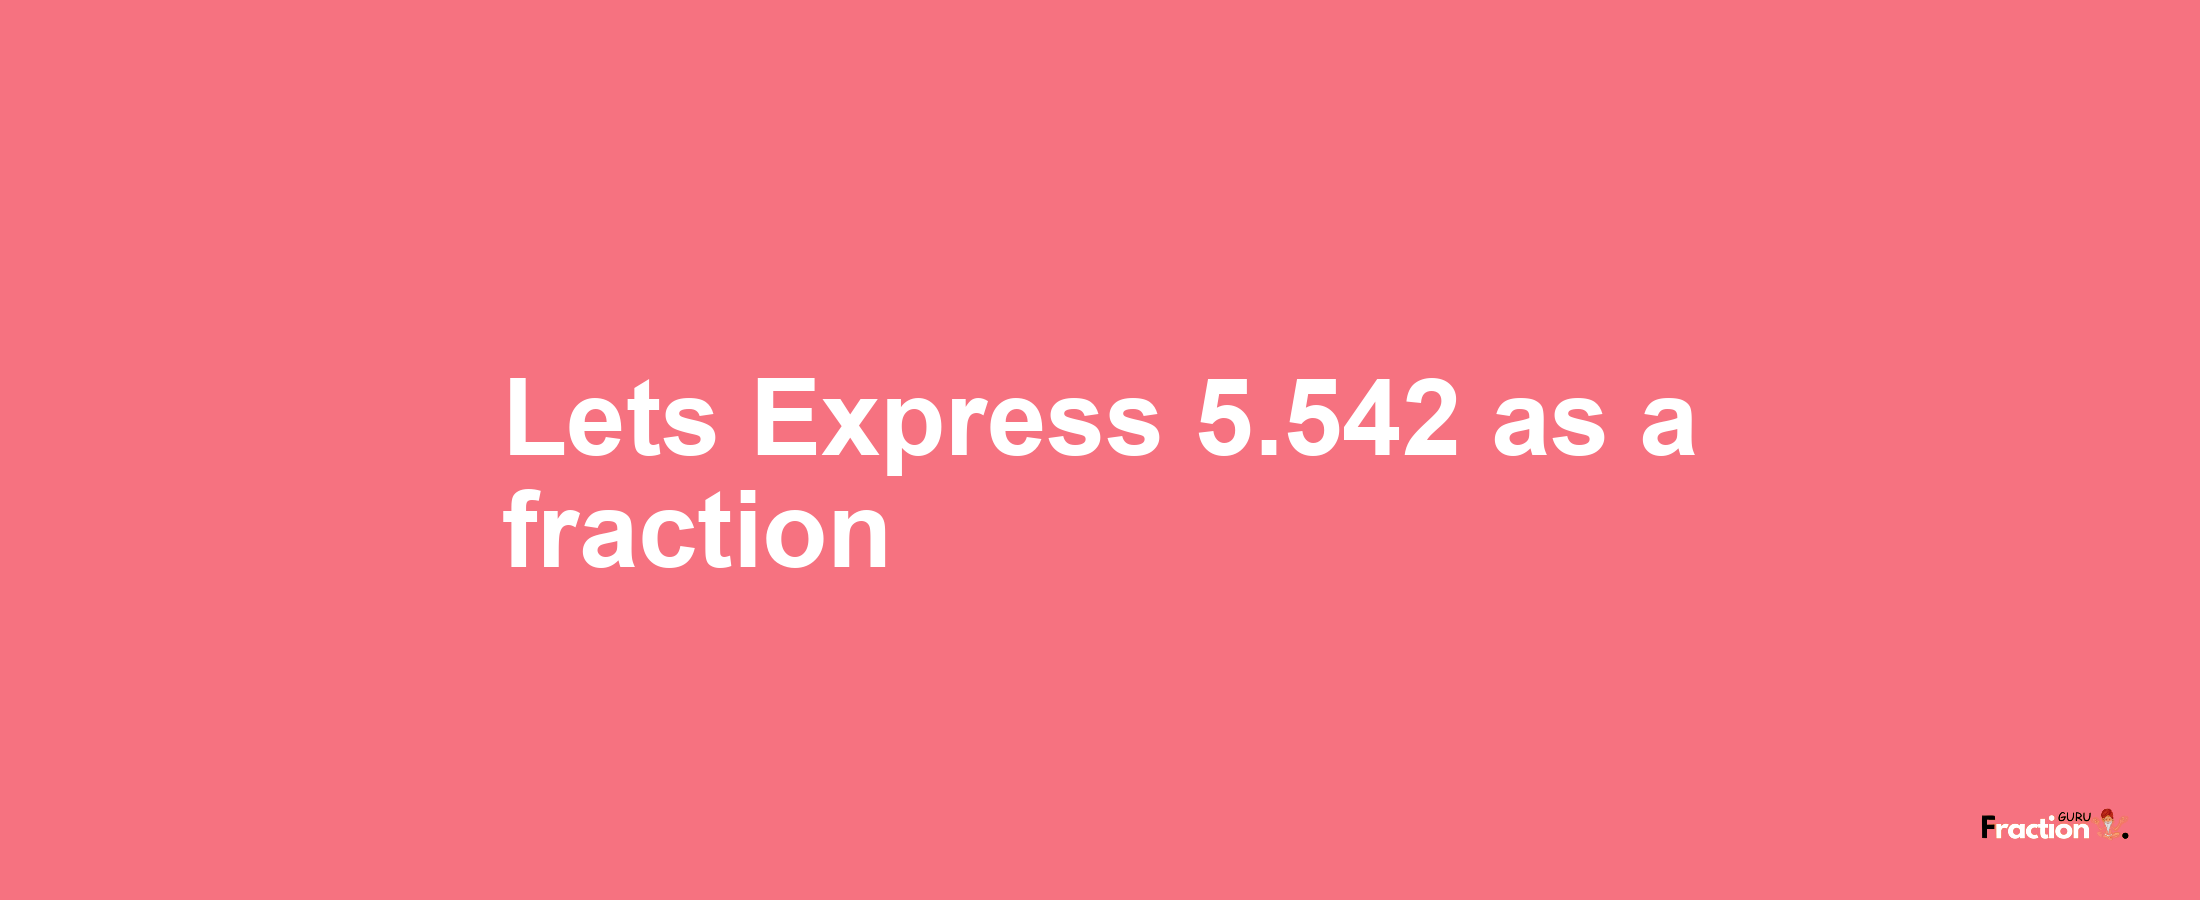 Lets Express 5.542 as afraction